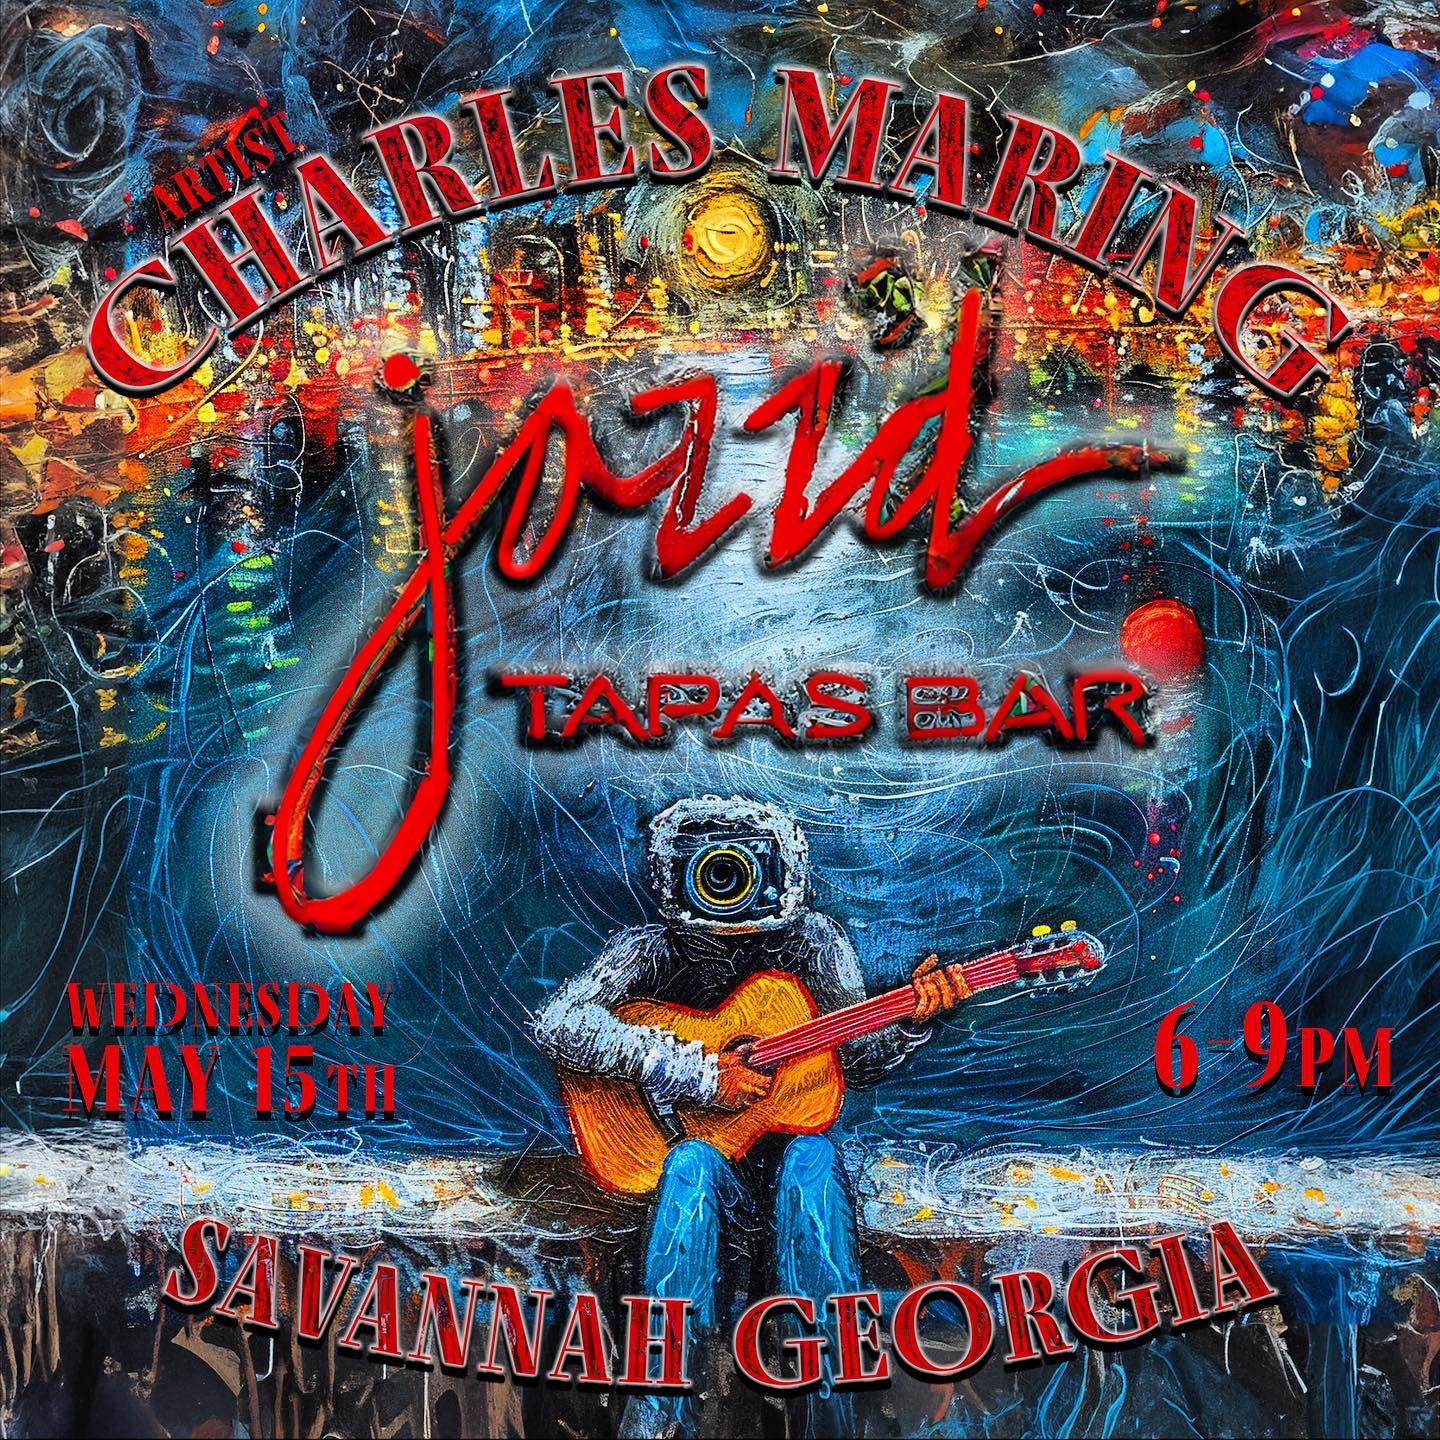 Catch me live at @jazzdtapasbar #savannah for a live performance this Wednesday May 15th from 6-9:30pm #art912 #visitsavannah #livemusic